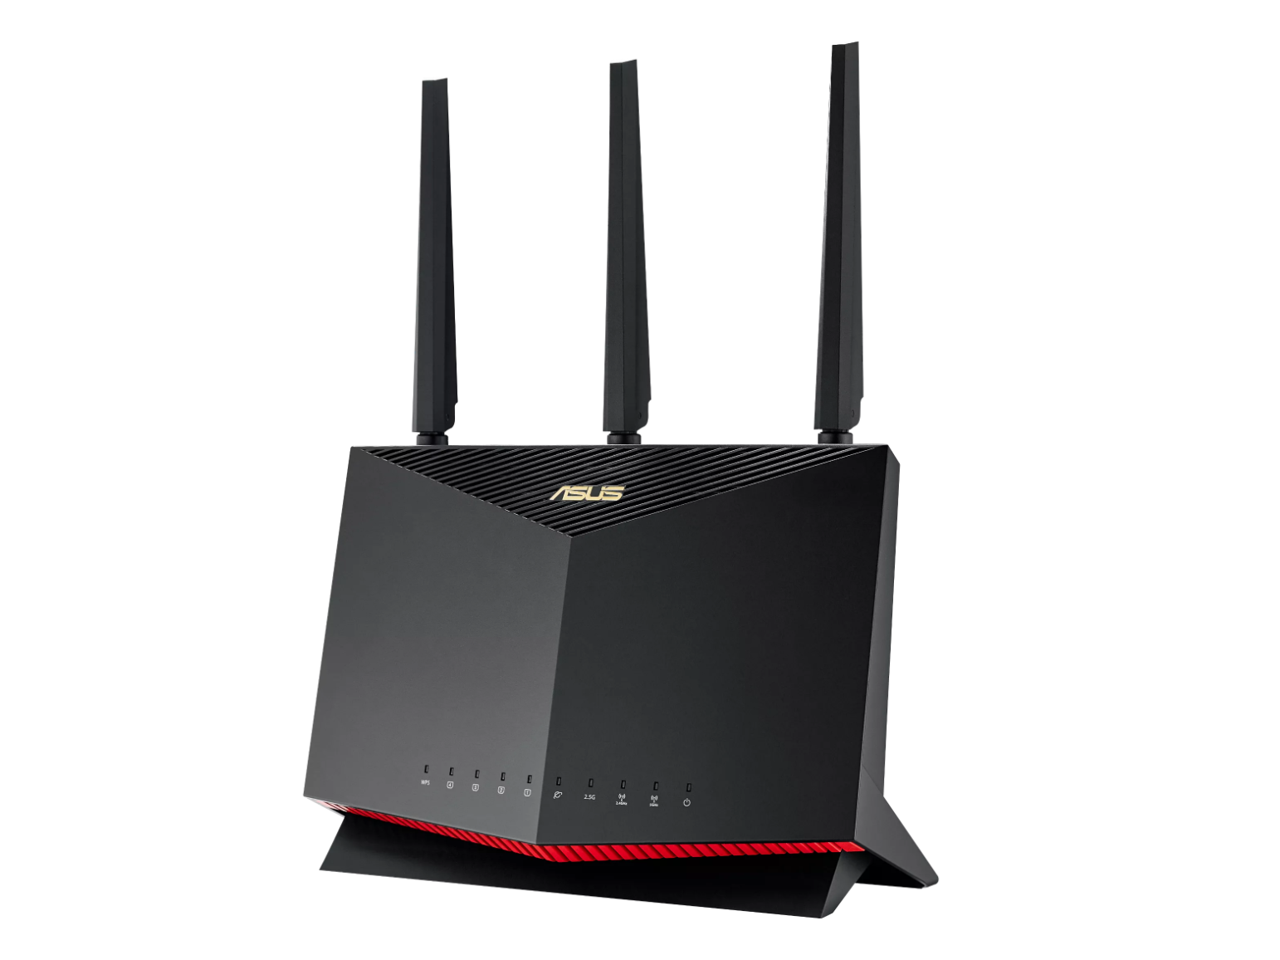 At Newegg ASUS RT-AX86U Pro Wireless Router + $25 off w/ promo code ERECP2728, $224.99